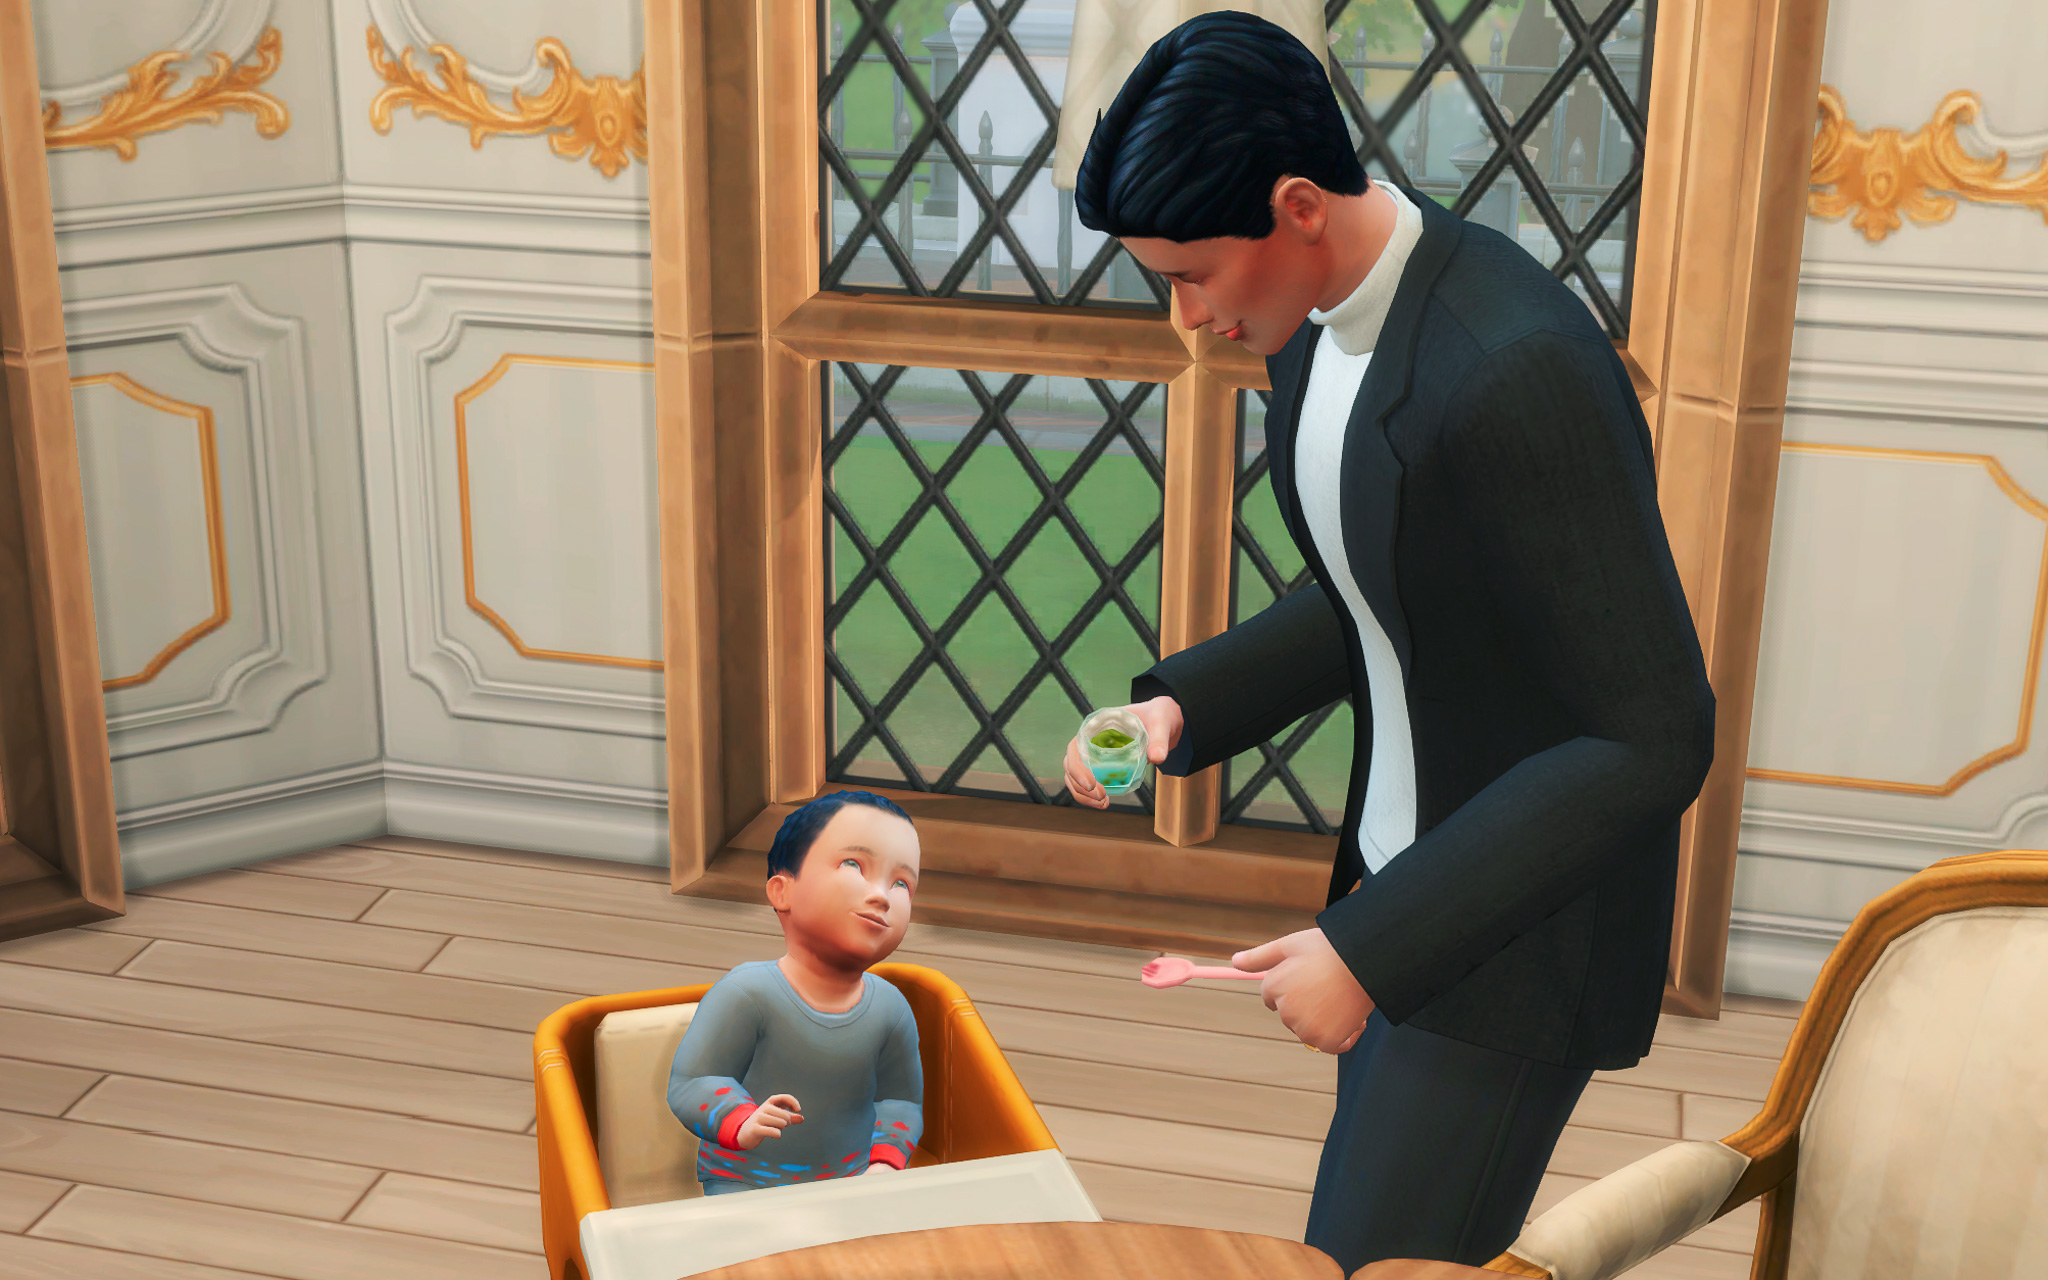 Asher feeds Evander baby food. Evander seems happy at first but his expression becomes more and more skeptical. 